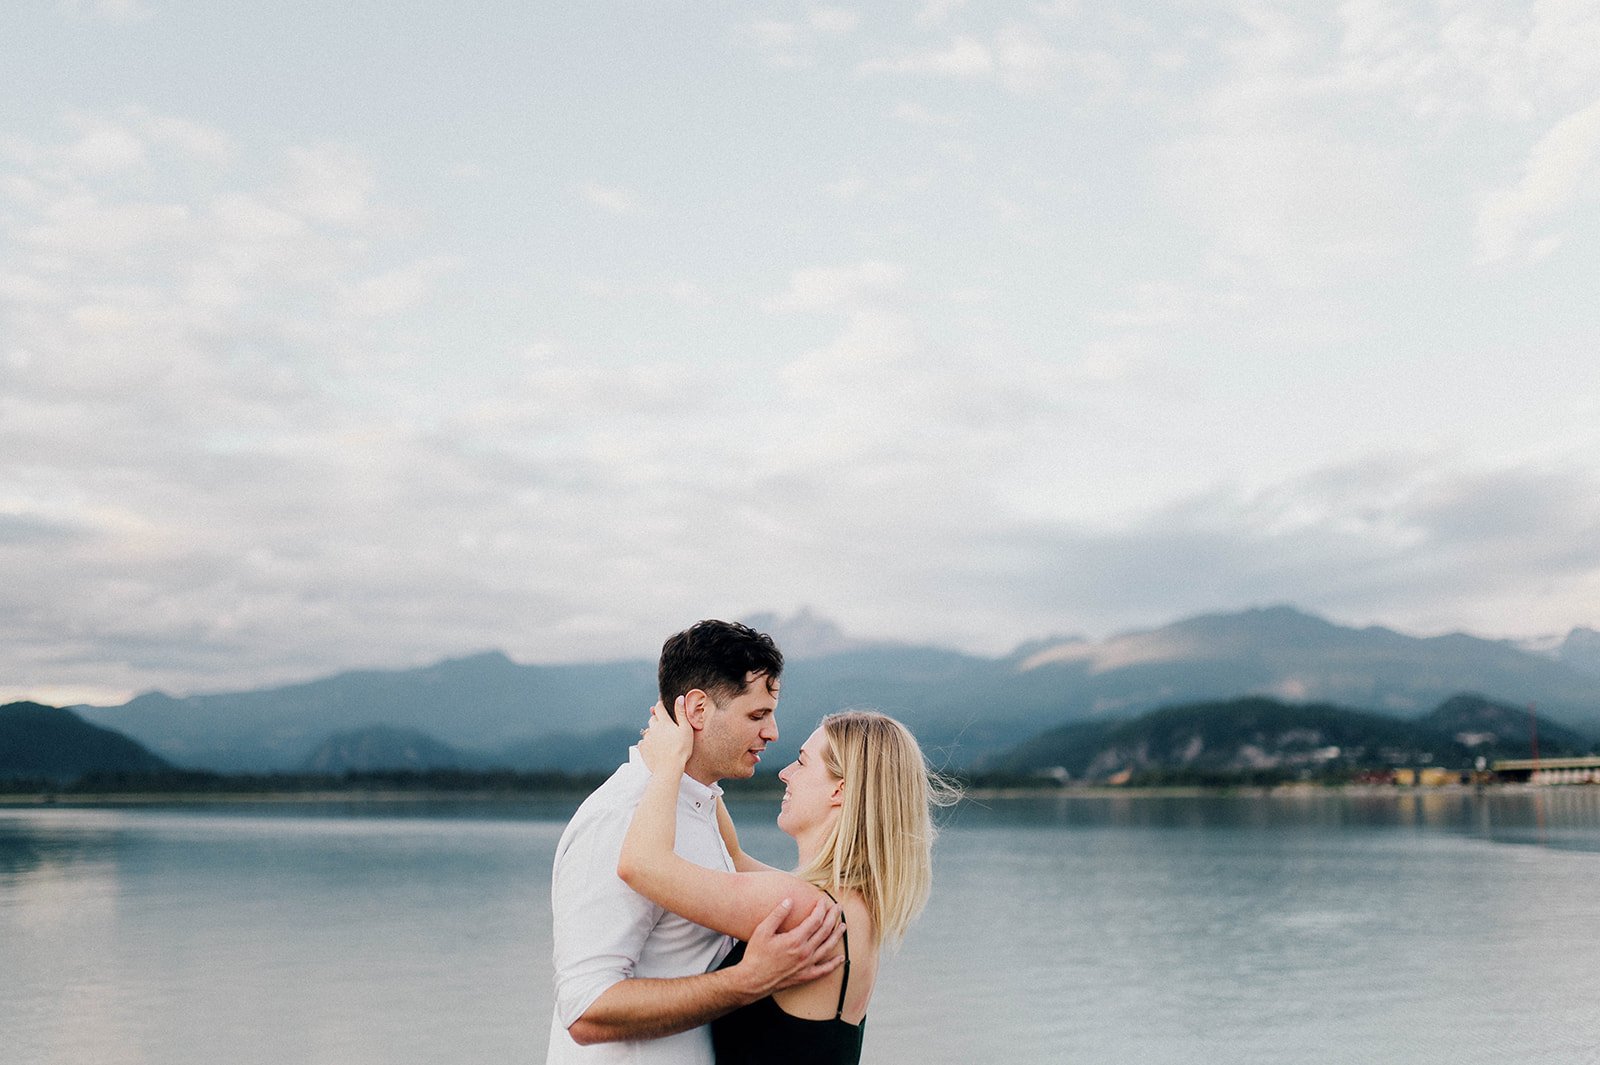 A man and woman embrace in front of a scenic lake surrounded by mountains in Squamish, BC   